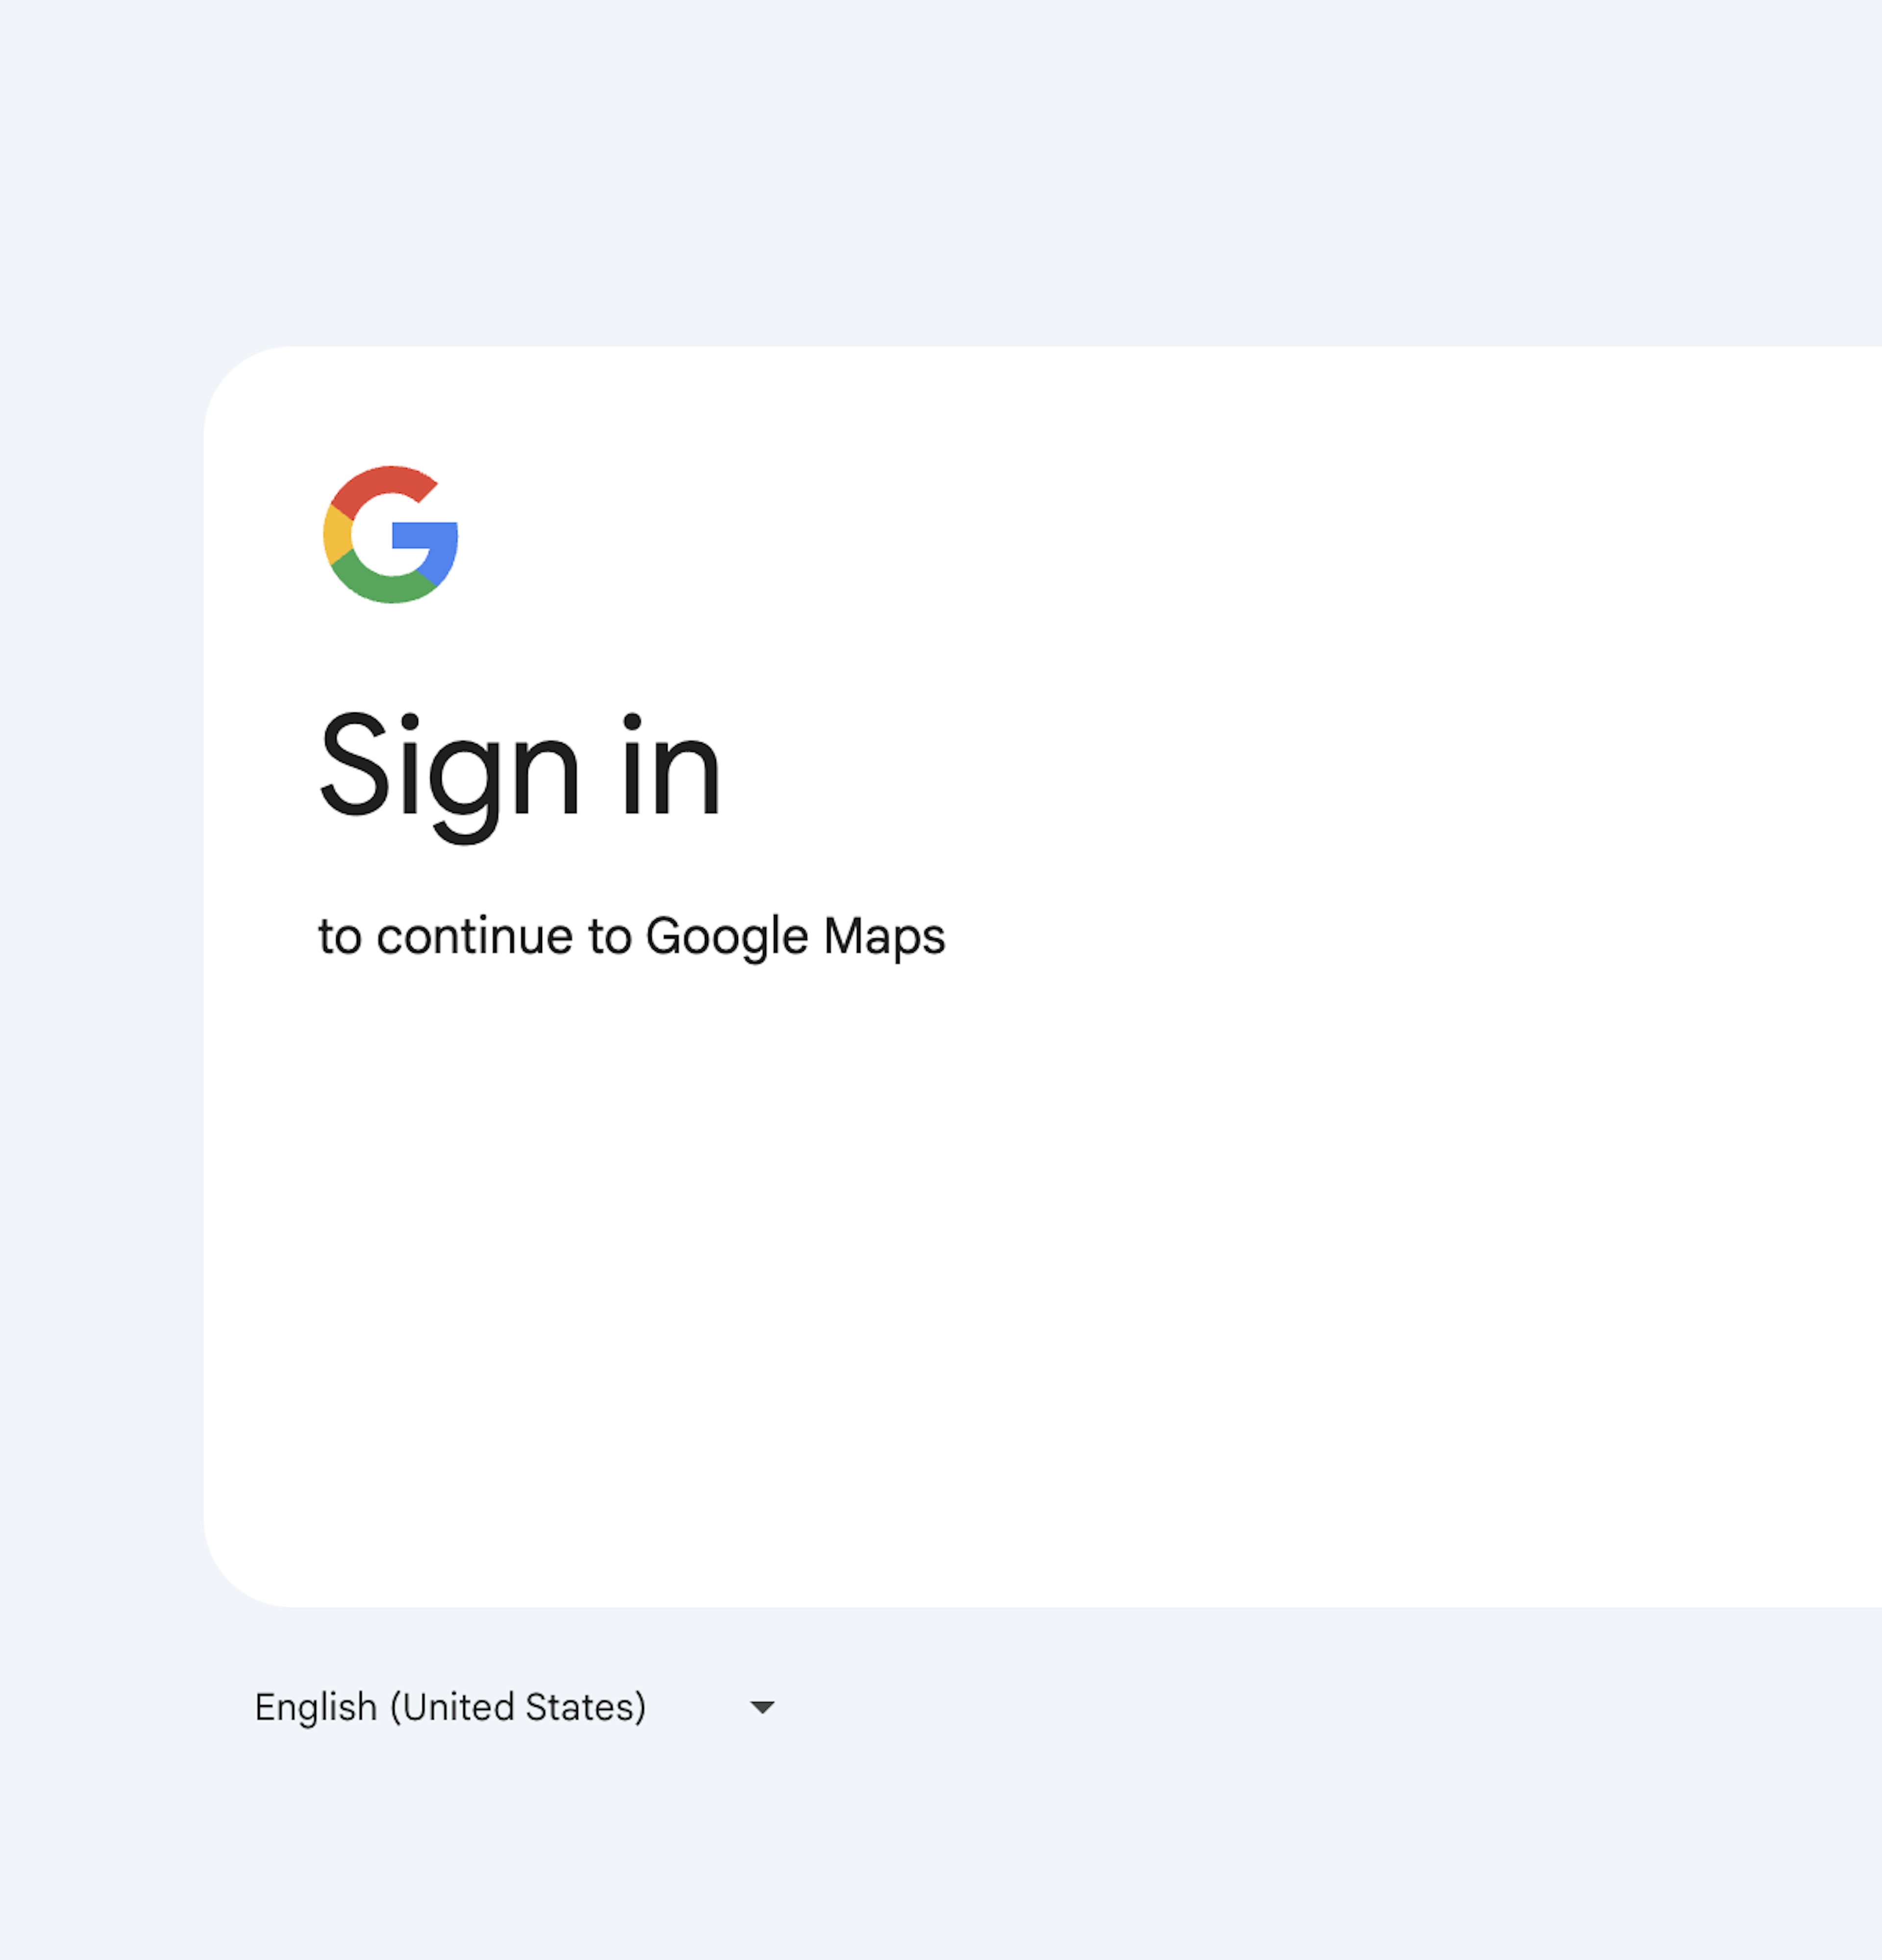 4. Sign in with a generic Google account